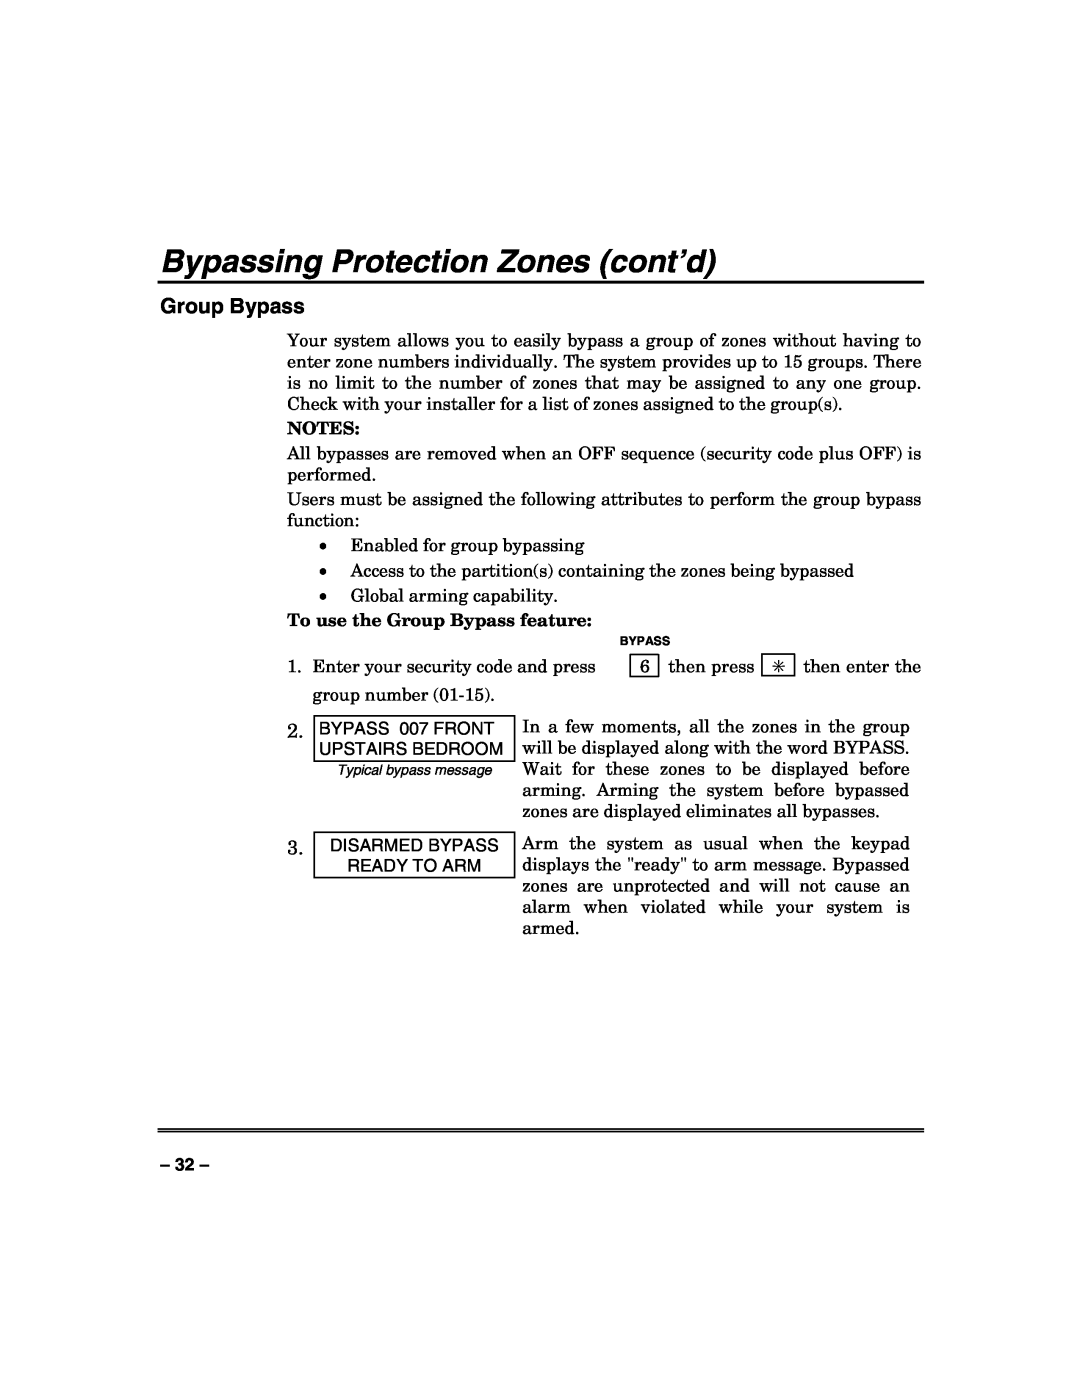 Honeywell VISTA-250FBP, VISTA-128FBP manual Bypassing Protection Zones cont’d, To use the Group Bypass feature 